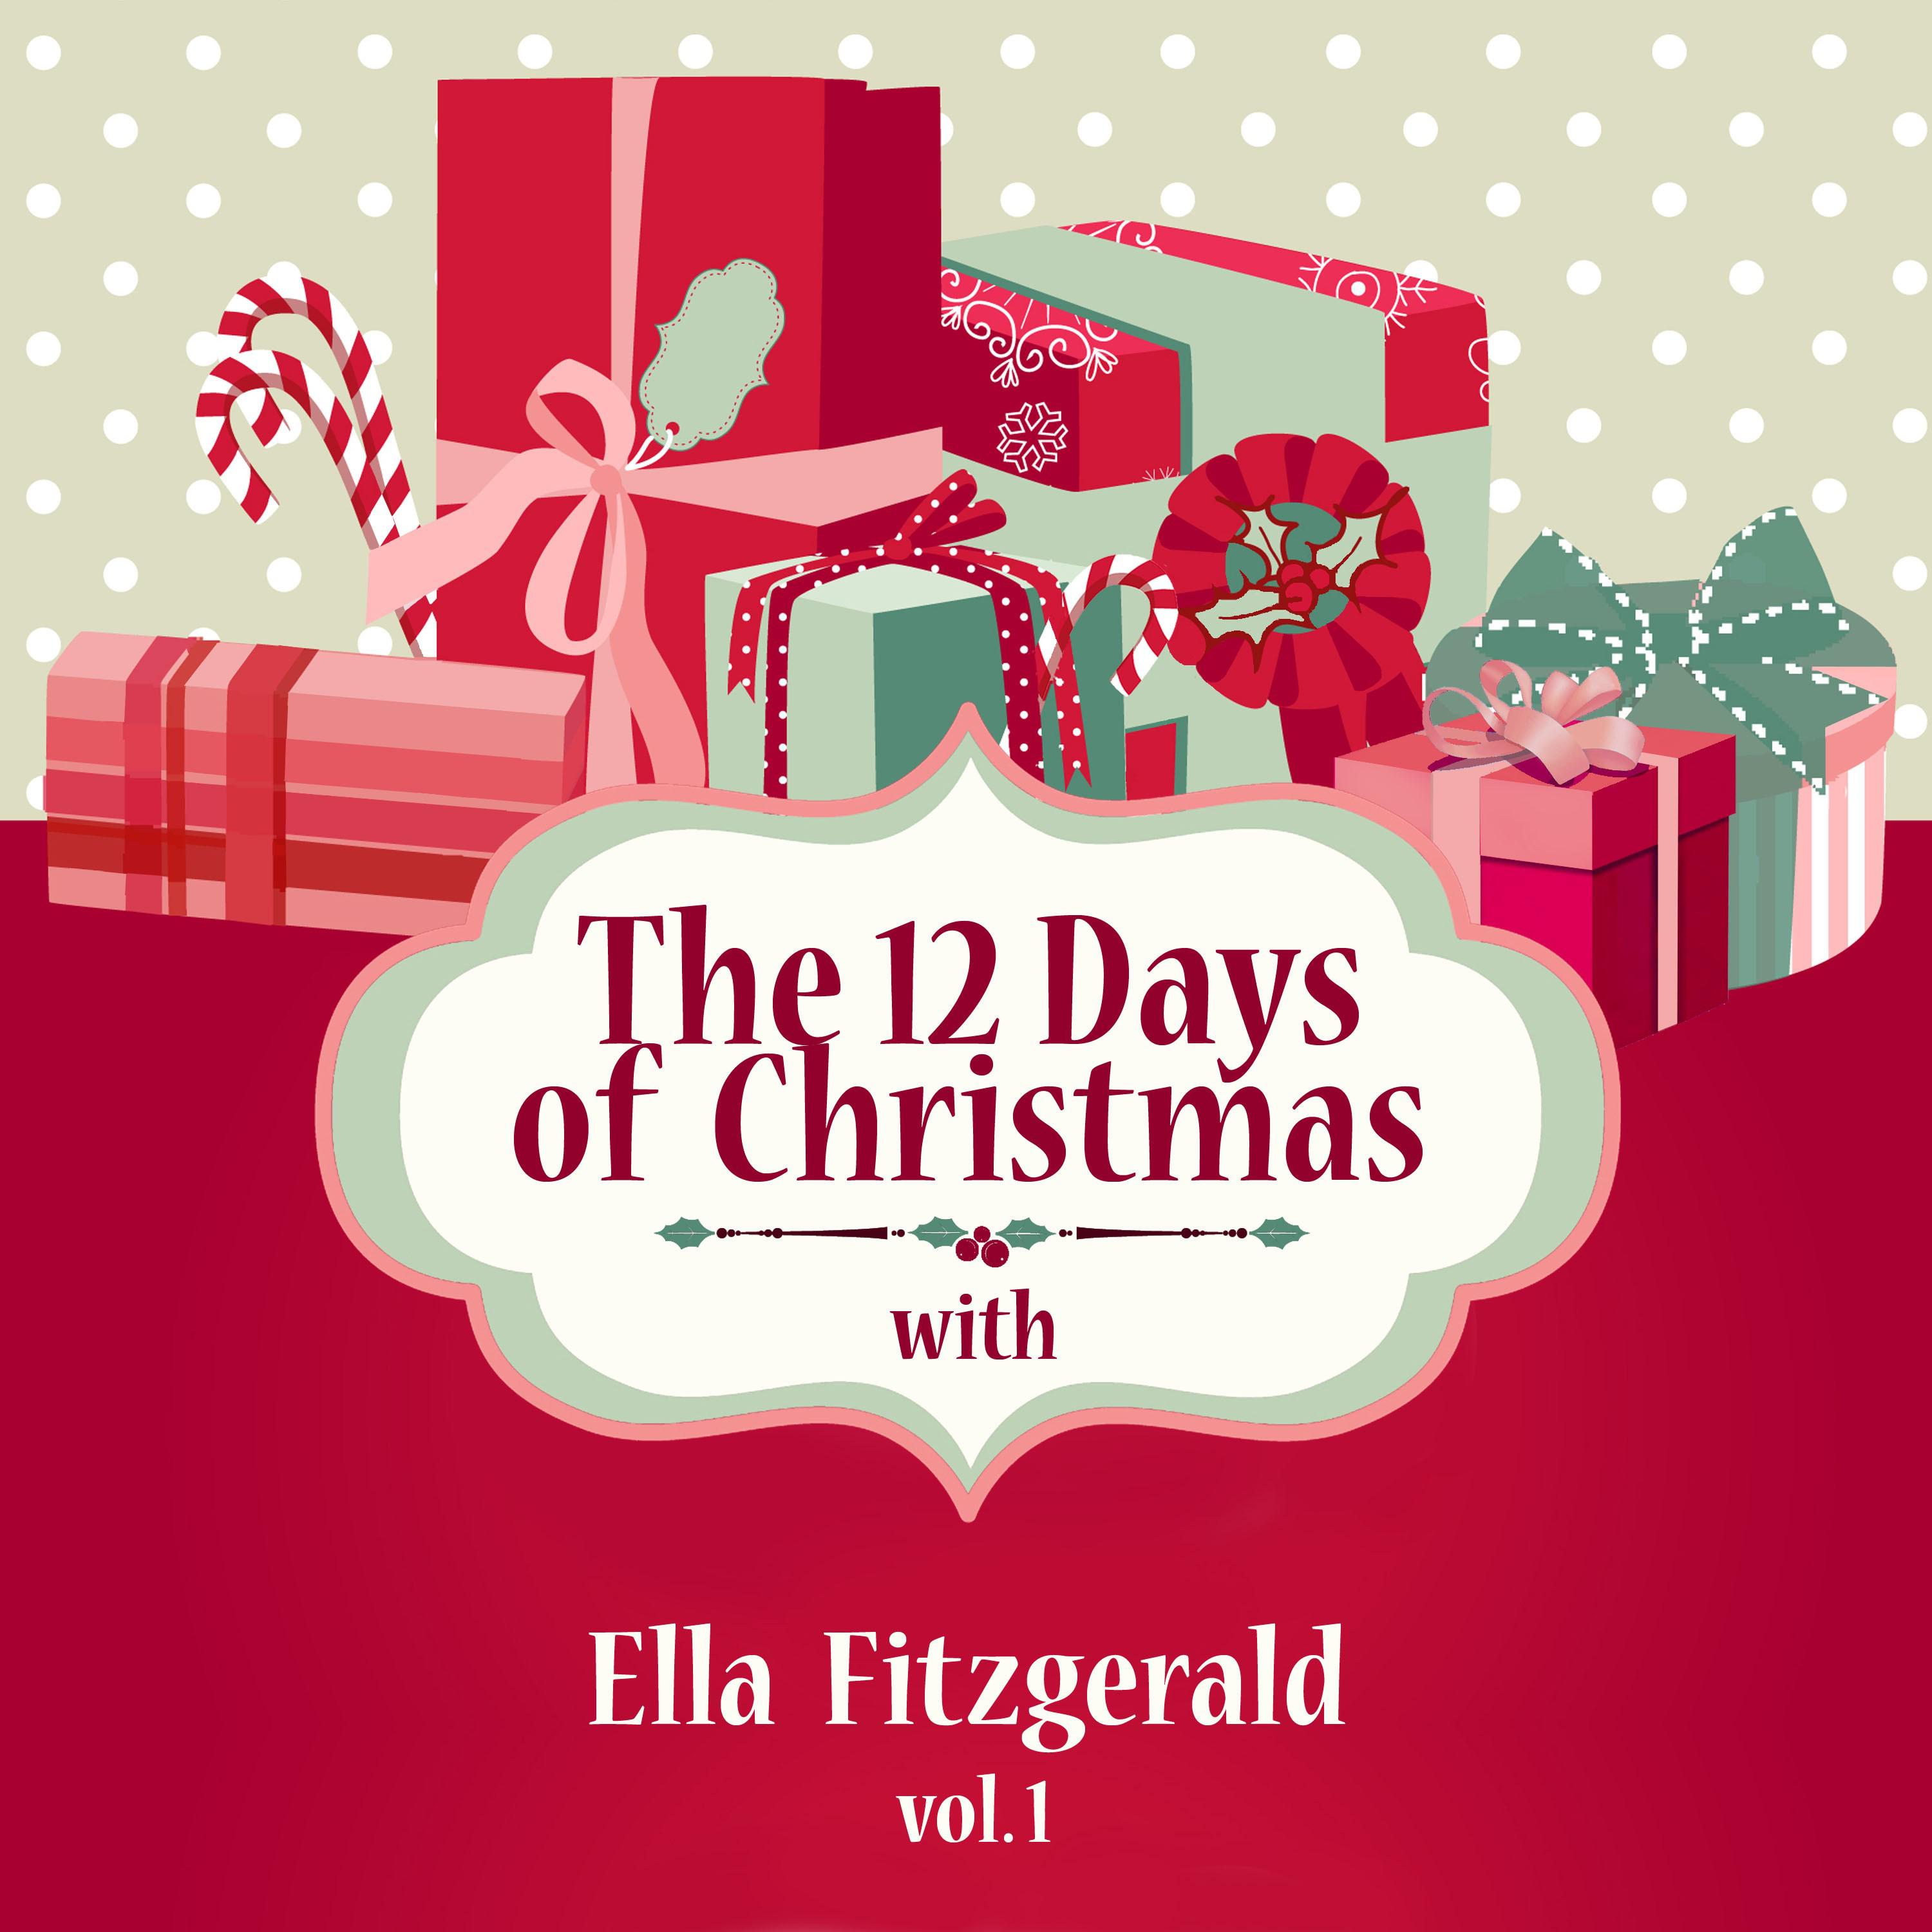 The 12 Days of Christmas with Ella Fitzgerald, Vol. 1